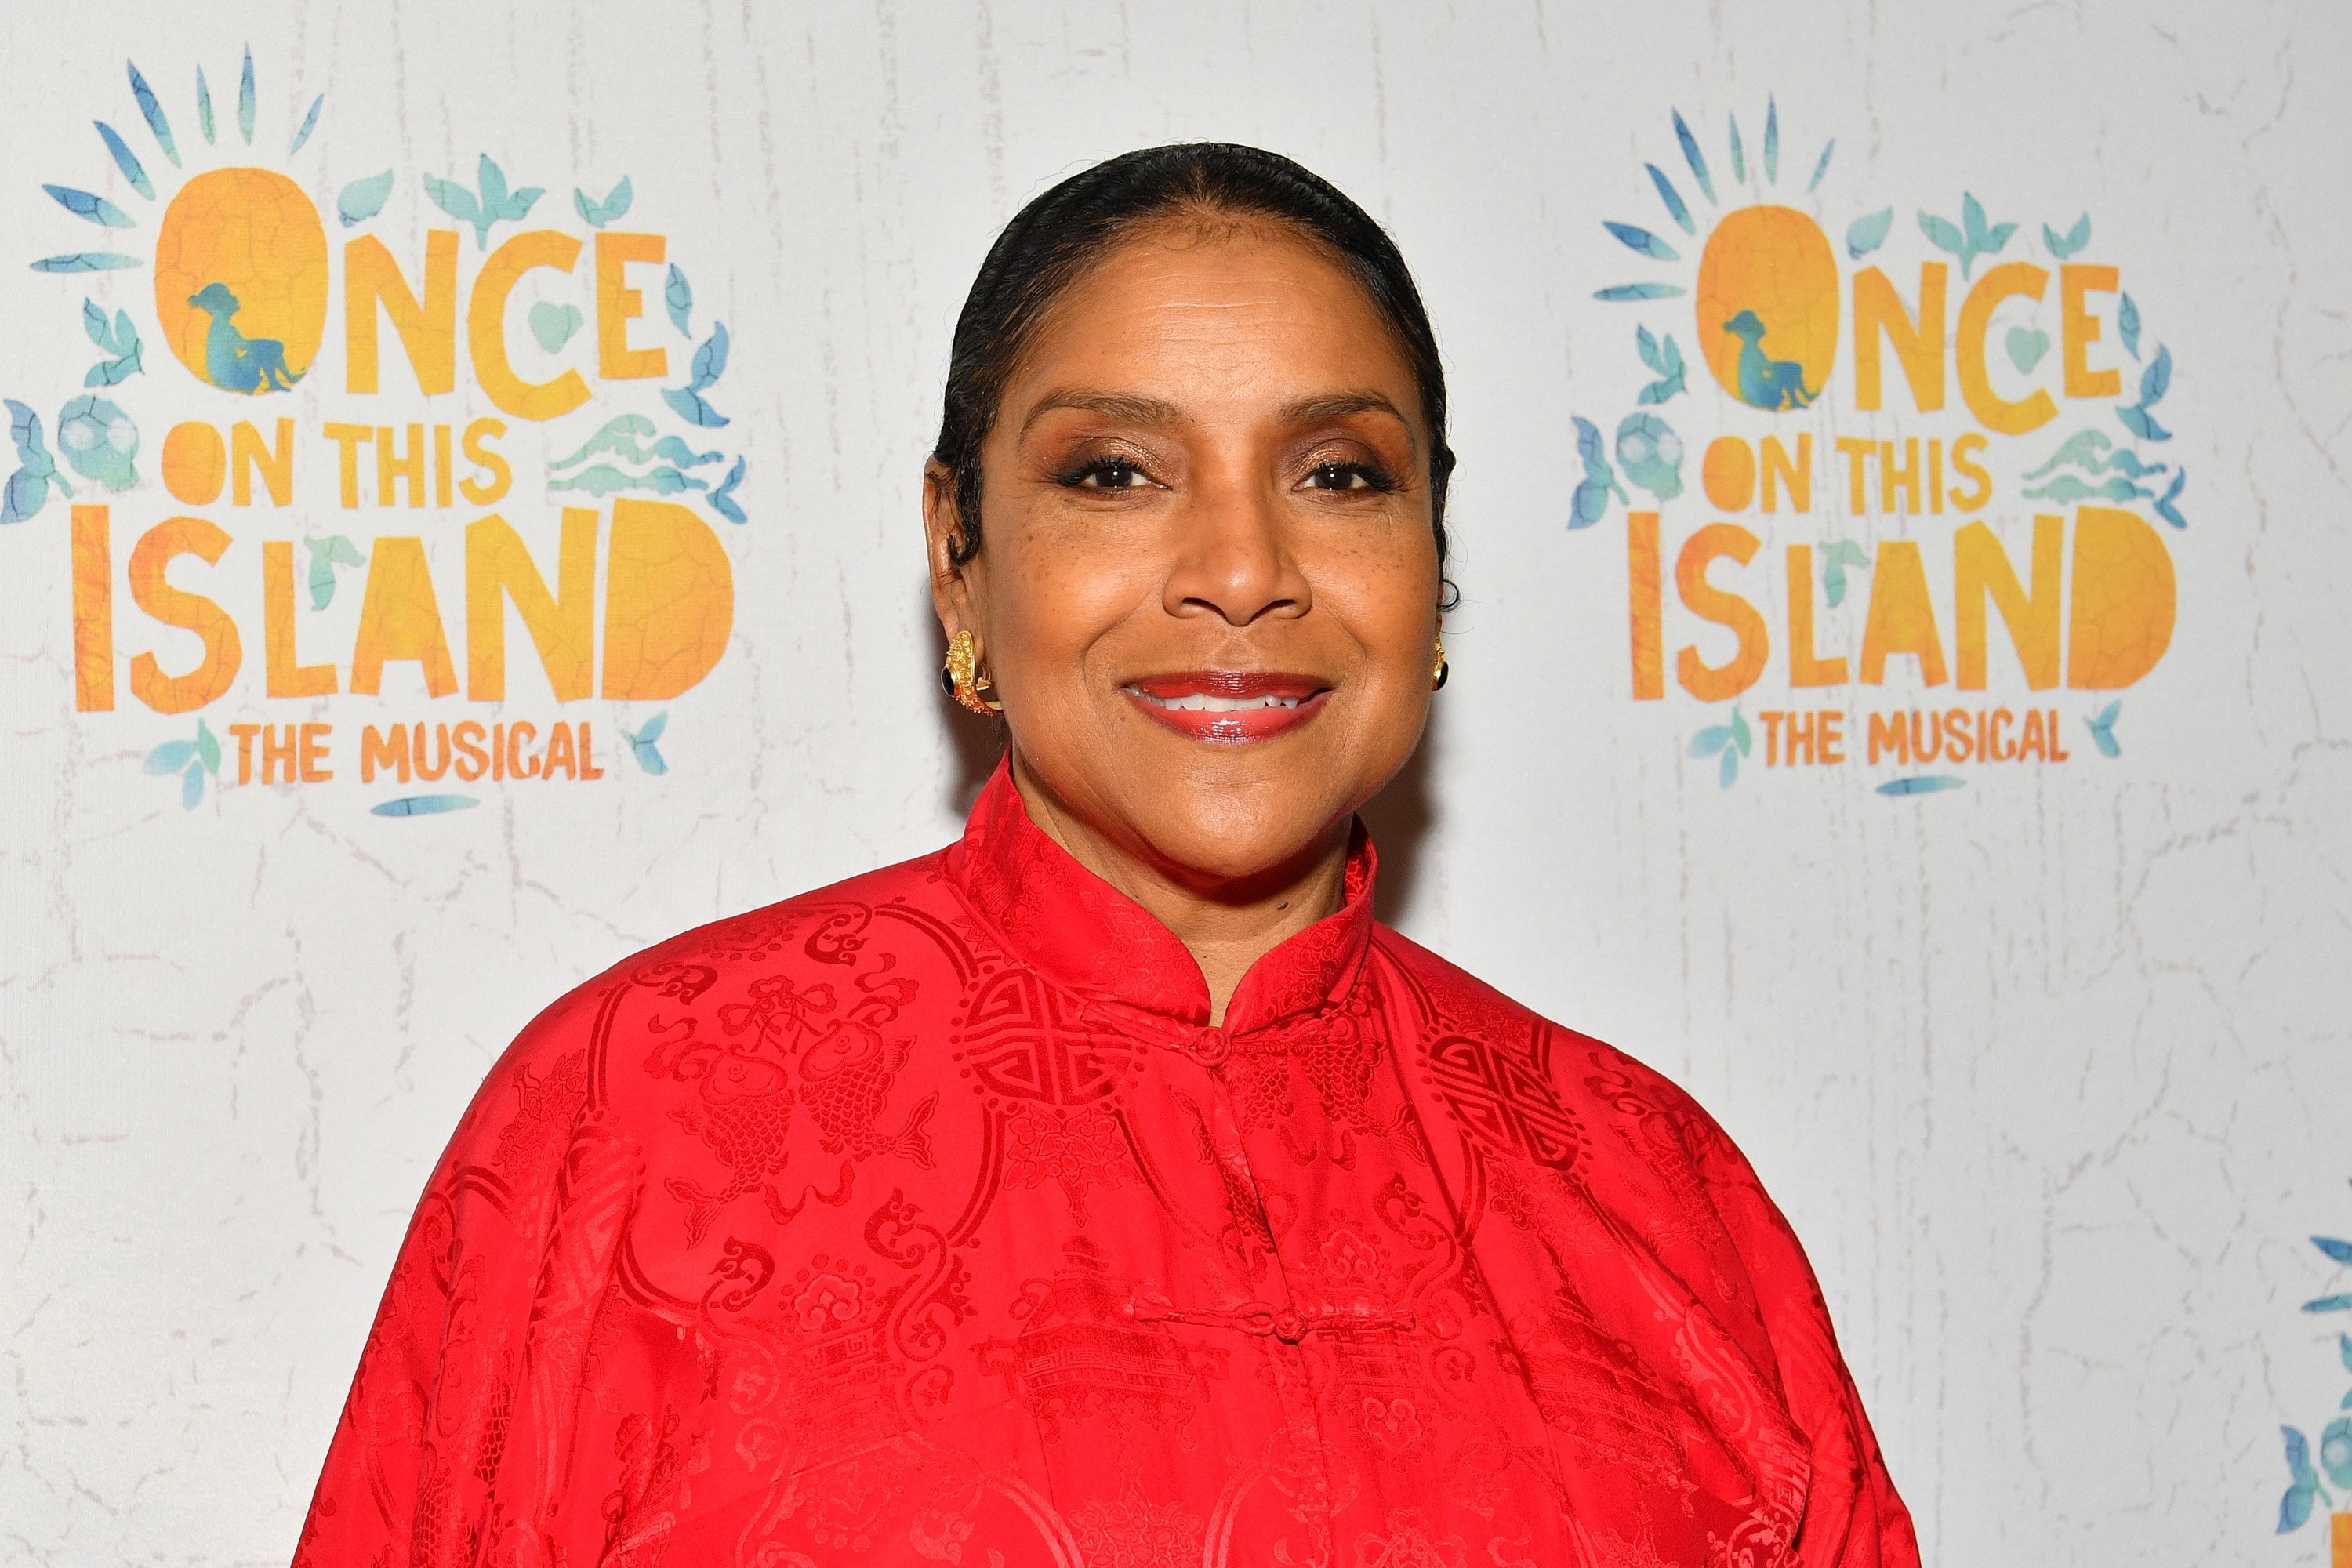 Phylicia Rashad attends the "Once On This Island" Broadway Opening Night at Circle in the Square Theatre on December 3, 2017. | Source: Getty Images